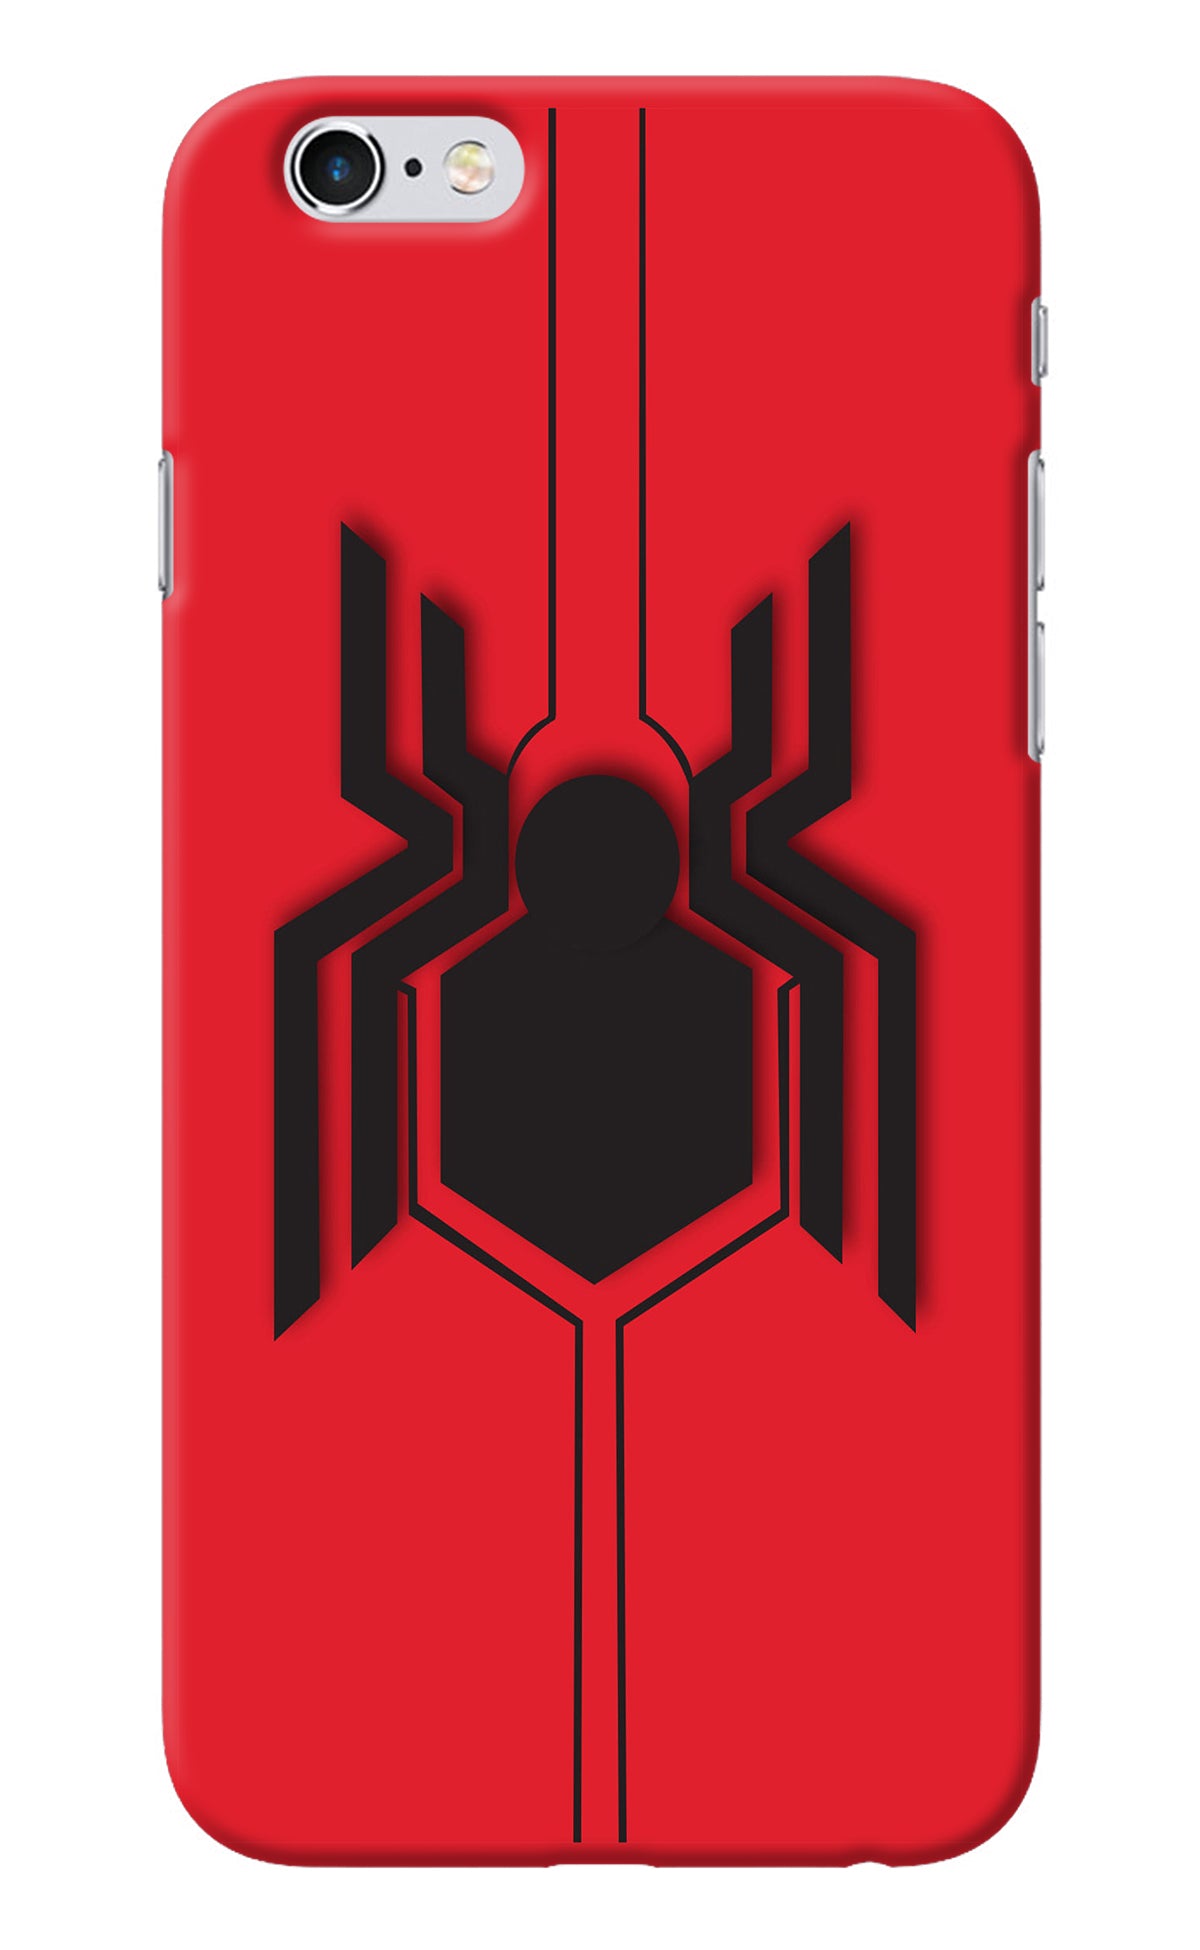 Spider iPhone 6/6s Back Cover